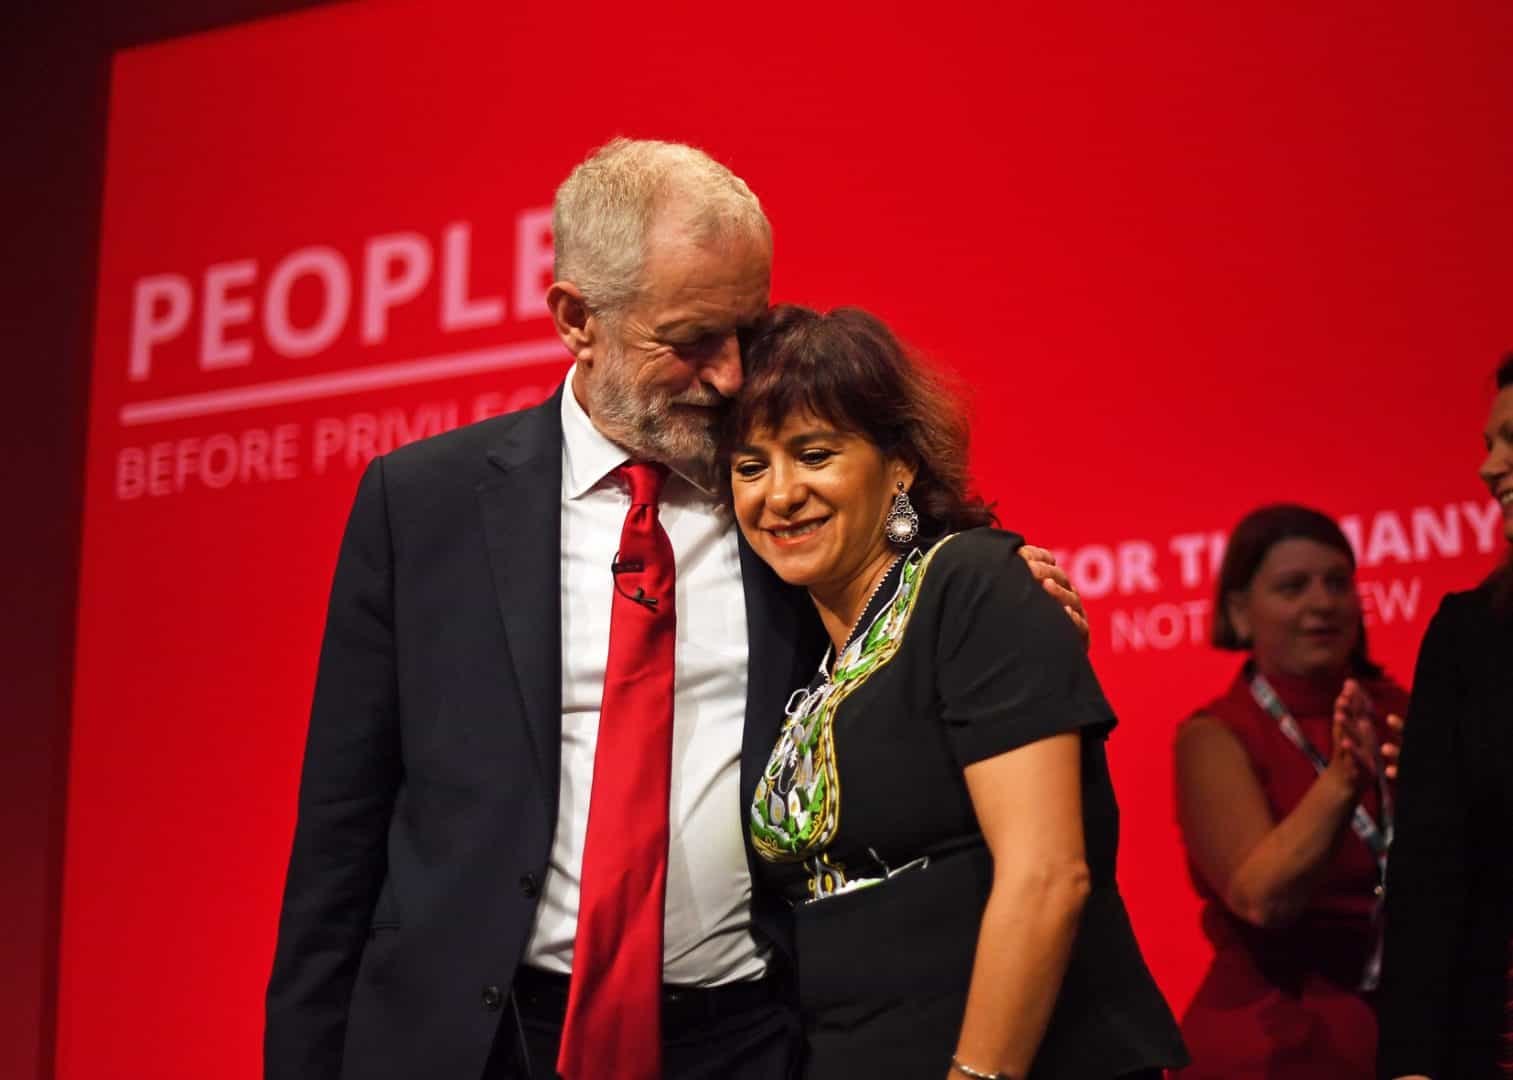 Jeremy Corbyn’s wife says outgoing Labour leader was ‘vilified’